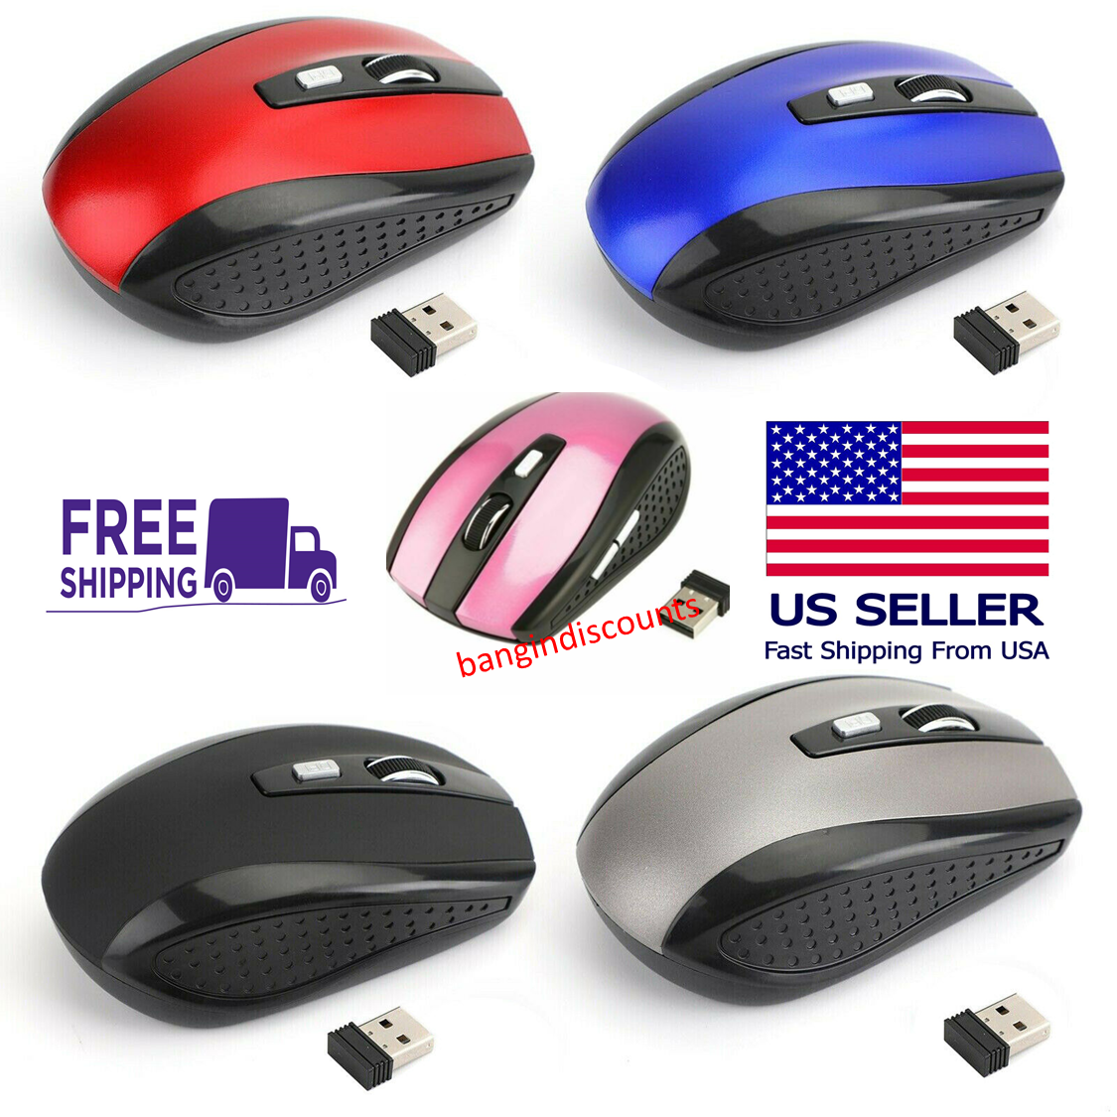 2.4ghz Wireless 2000dpi Cordless Optical Mouse Mice Usb Receiver For Pc Laptop